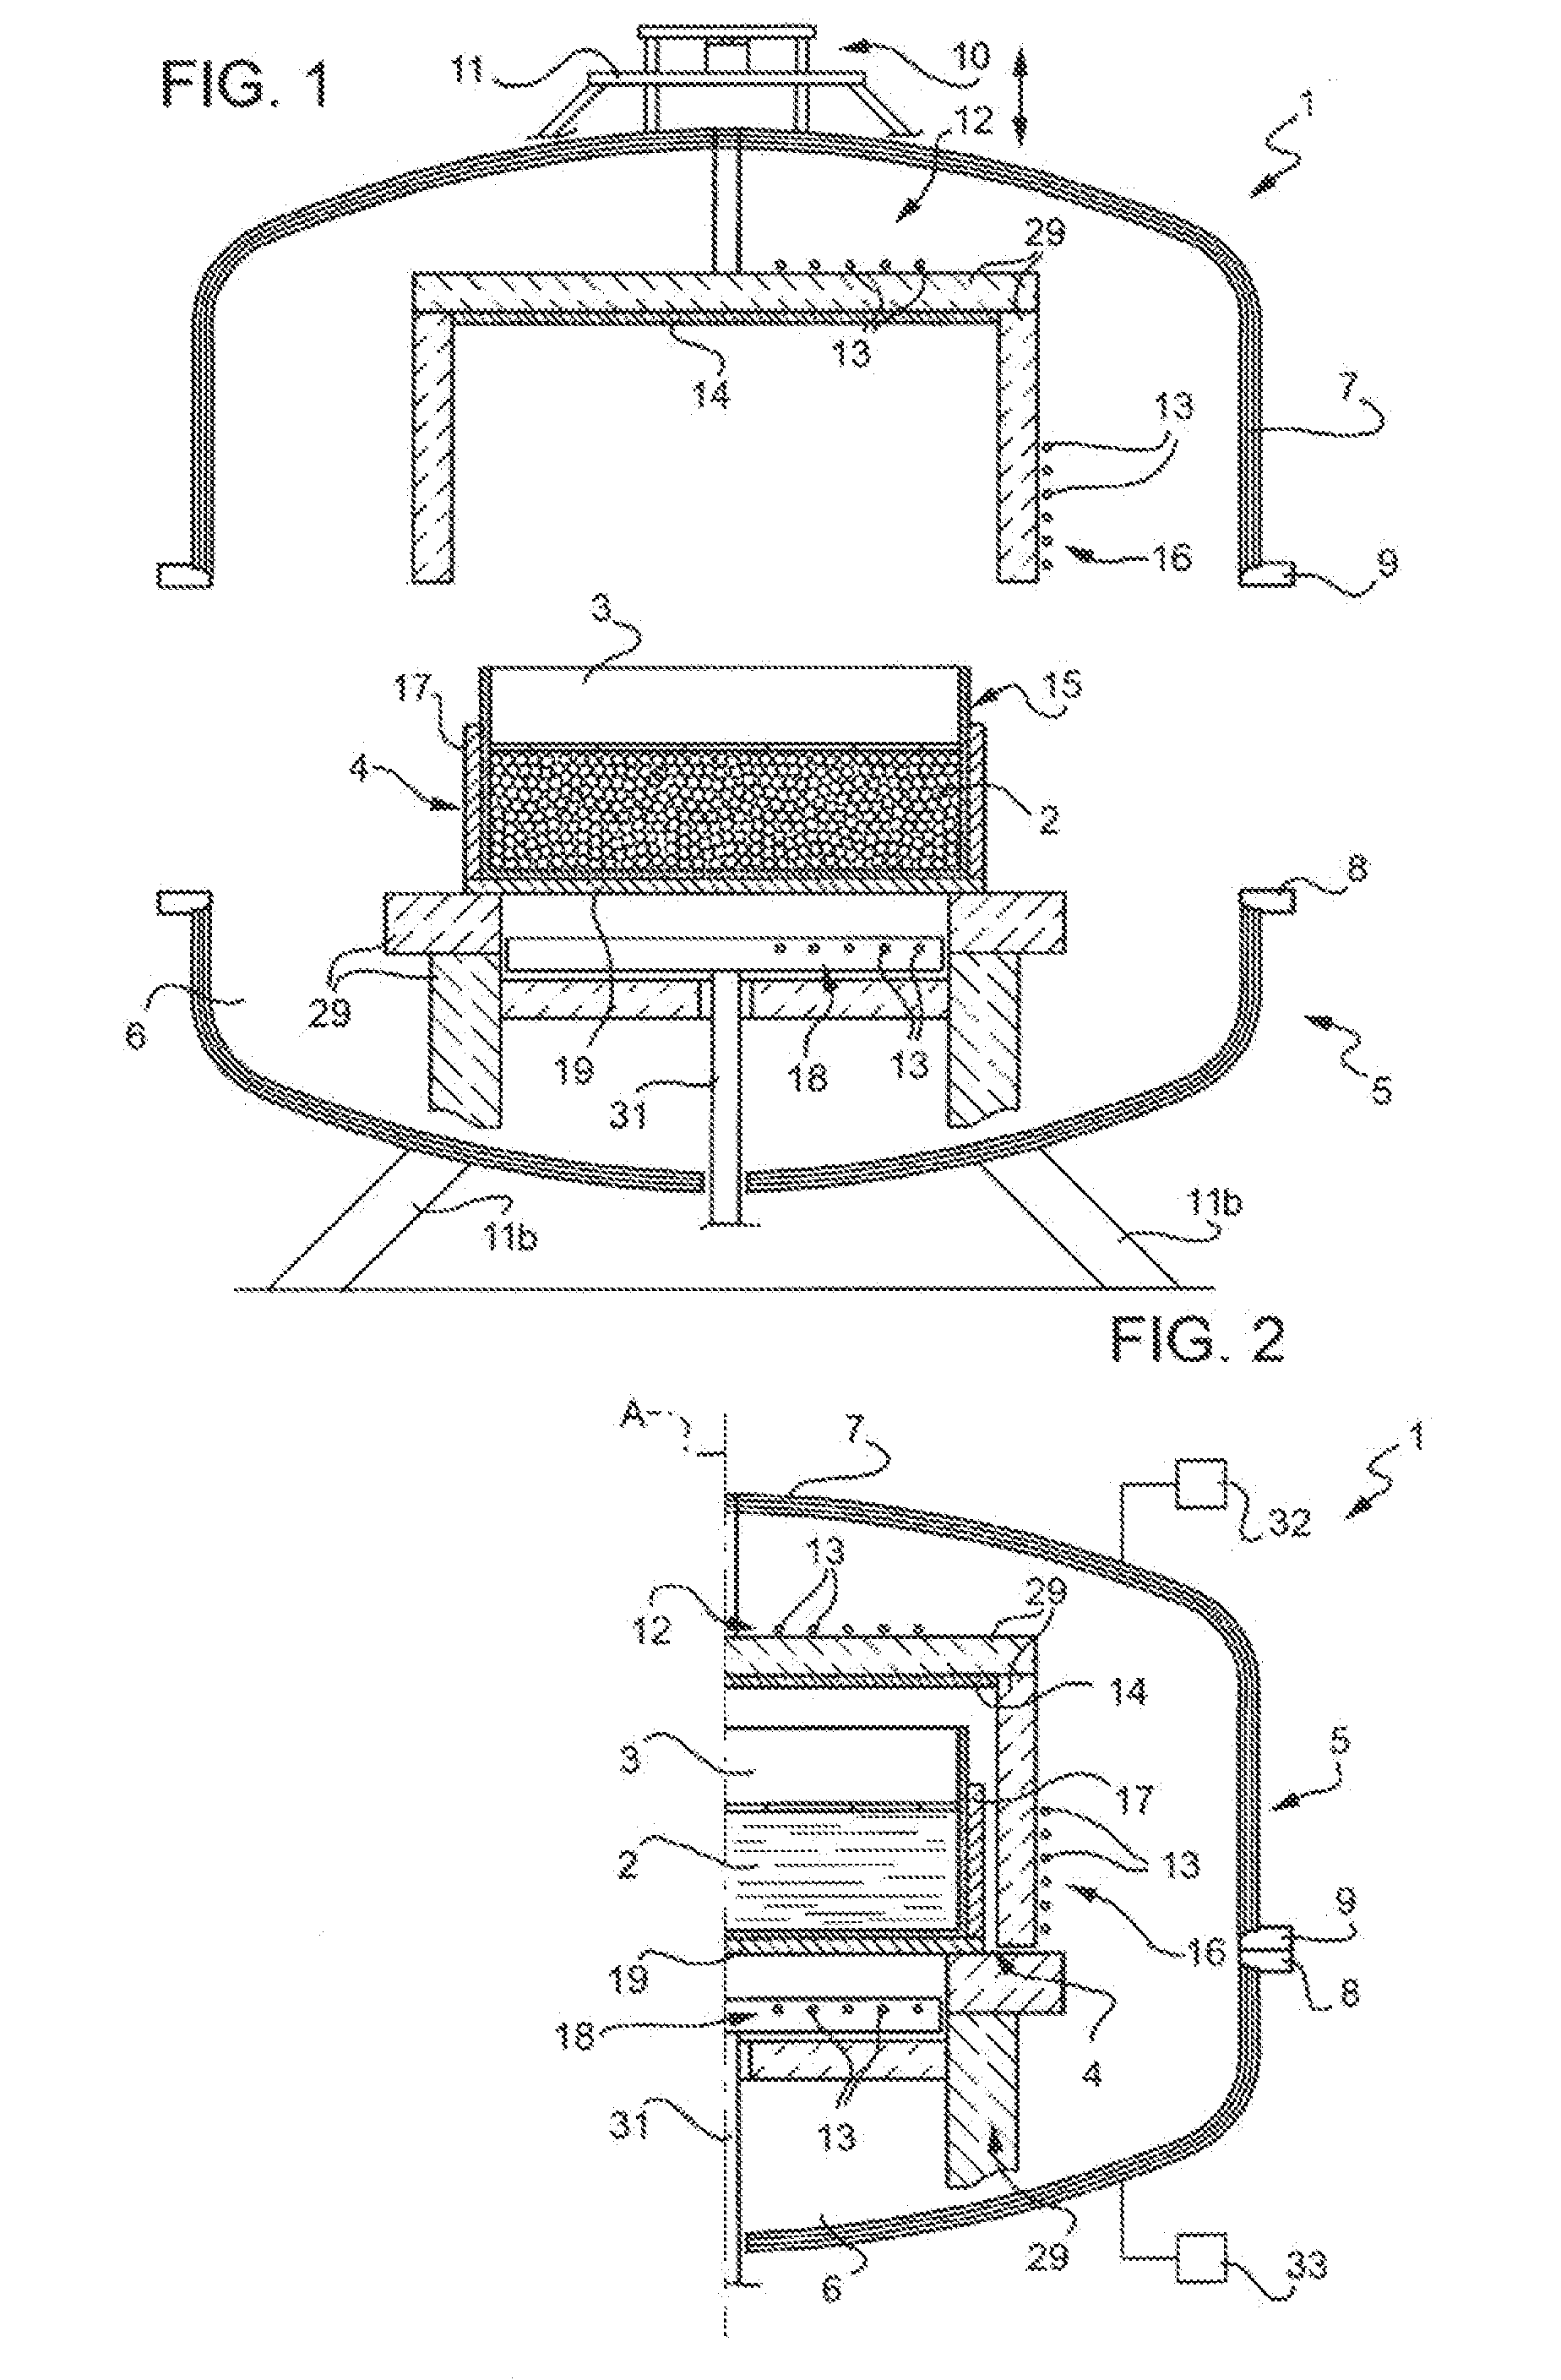 Method and device for obtaining a multicrystalline semiconductor material, in particular silicon